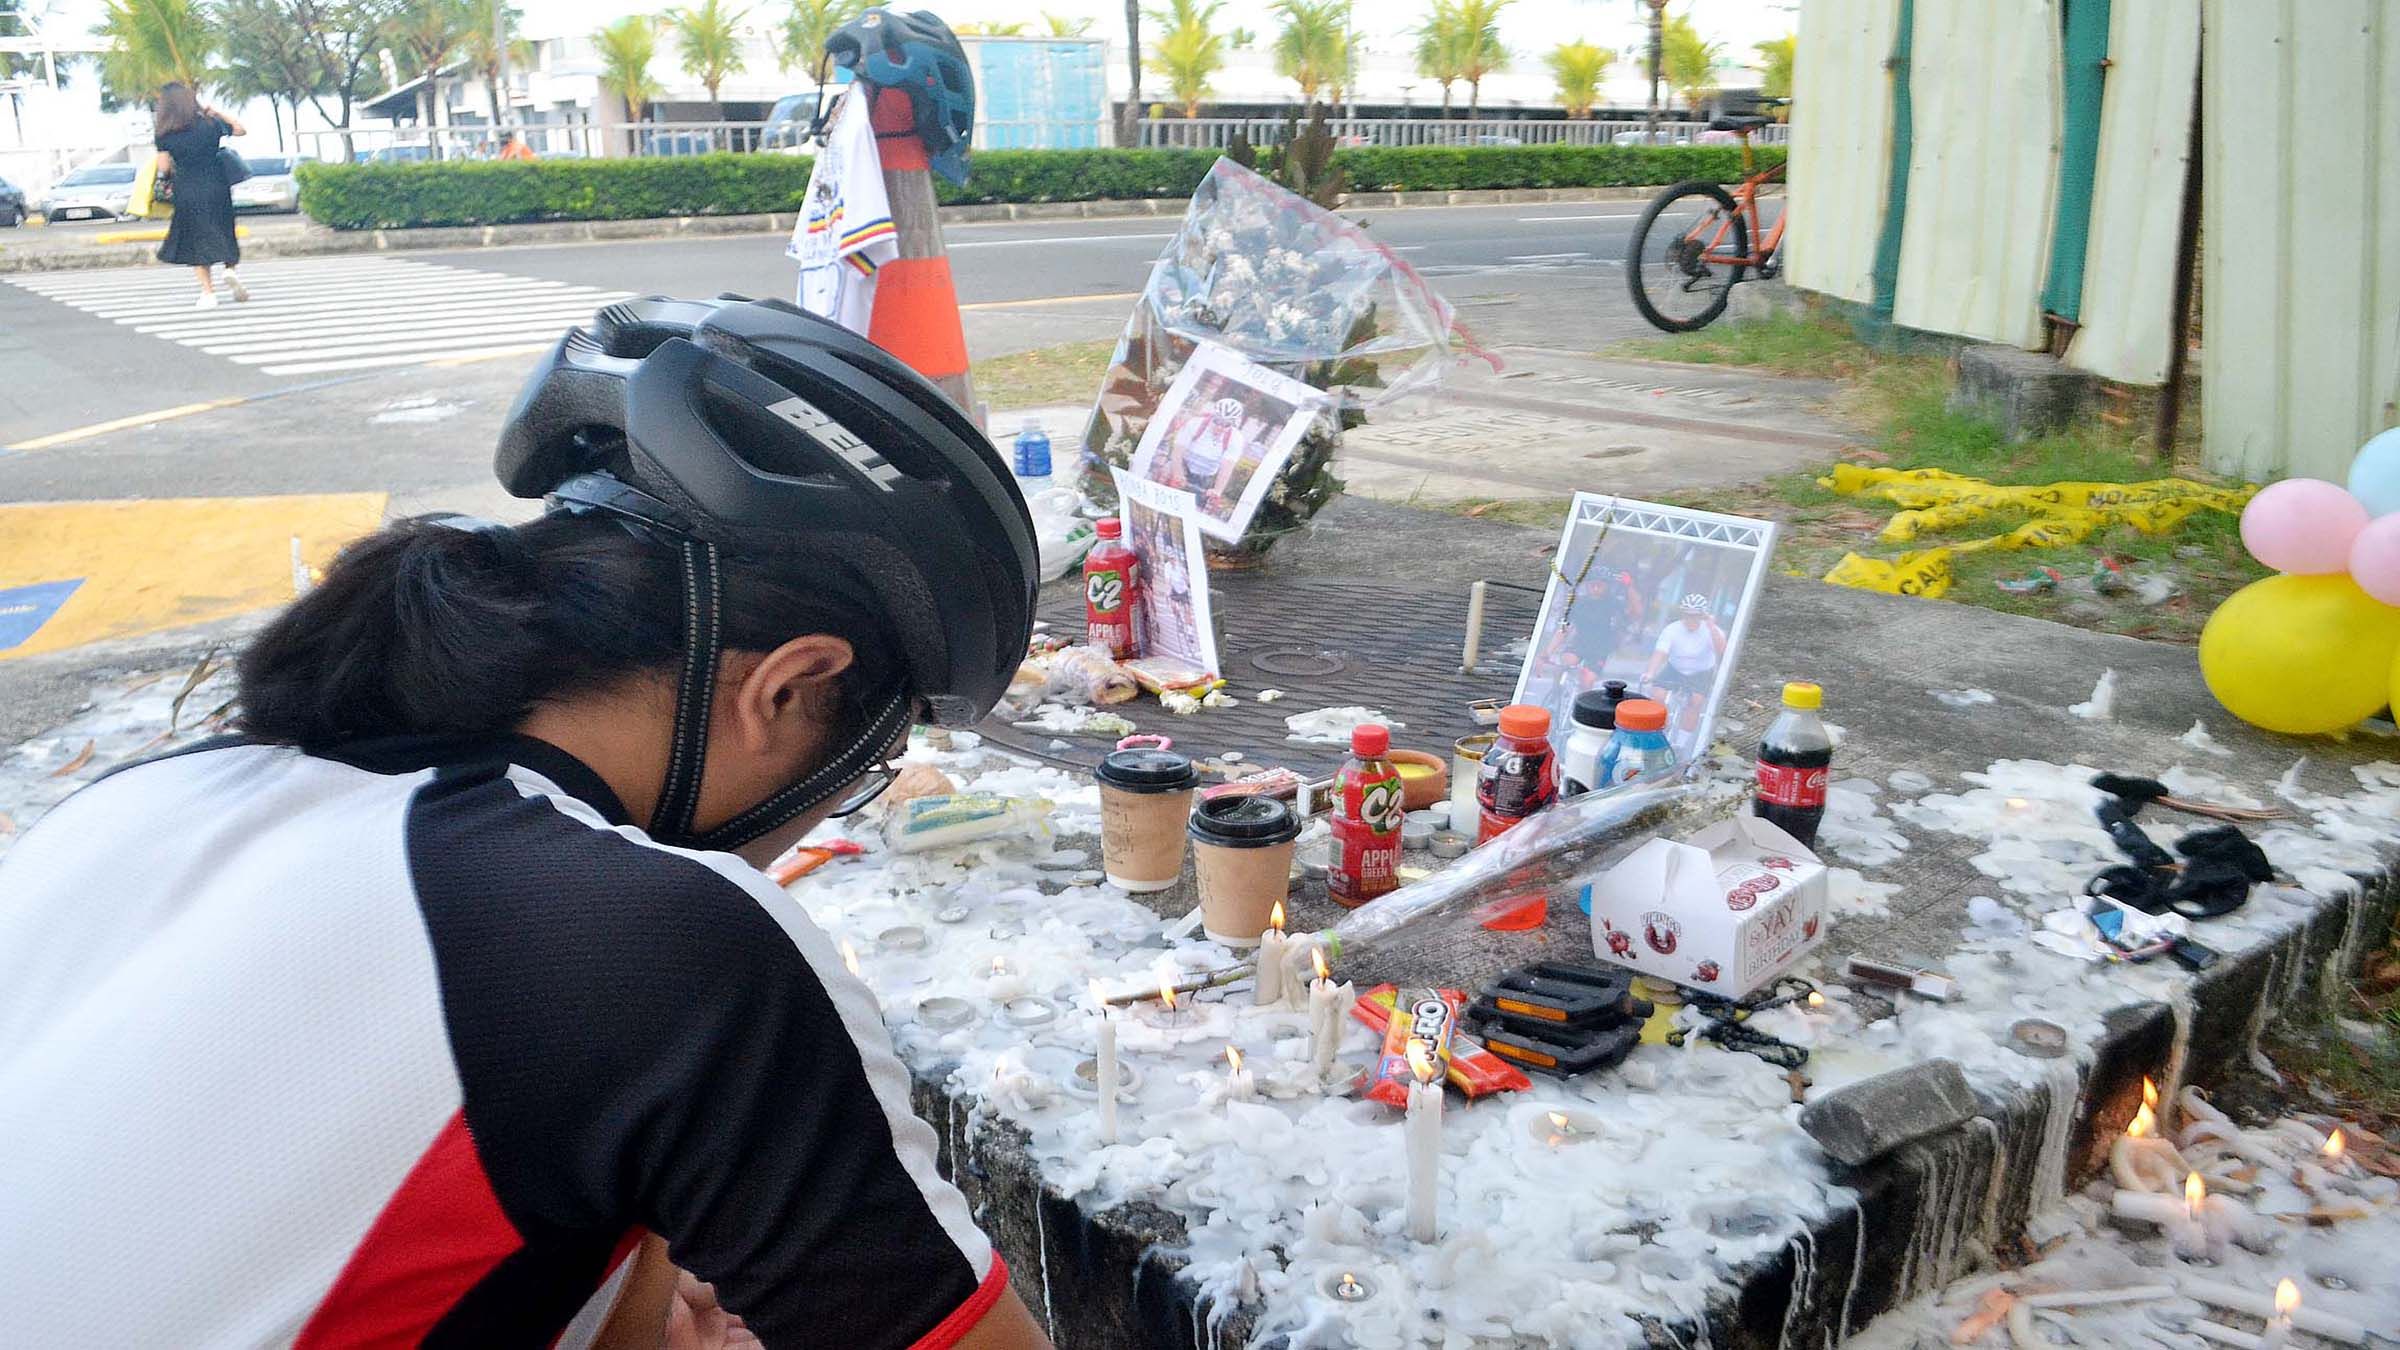 FLOWERS AND CANDLES FOR DEAD CYCLISTS Mike Taboy